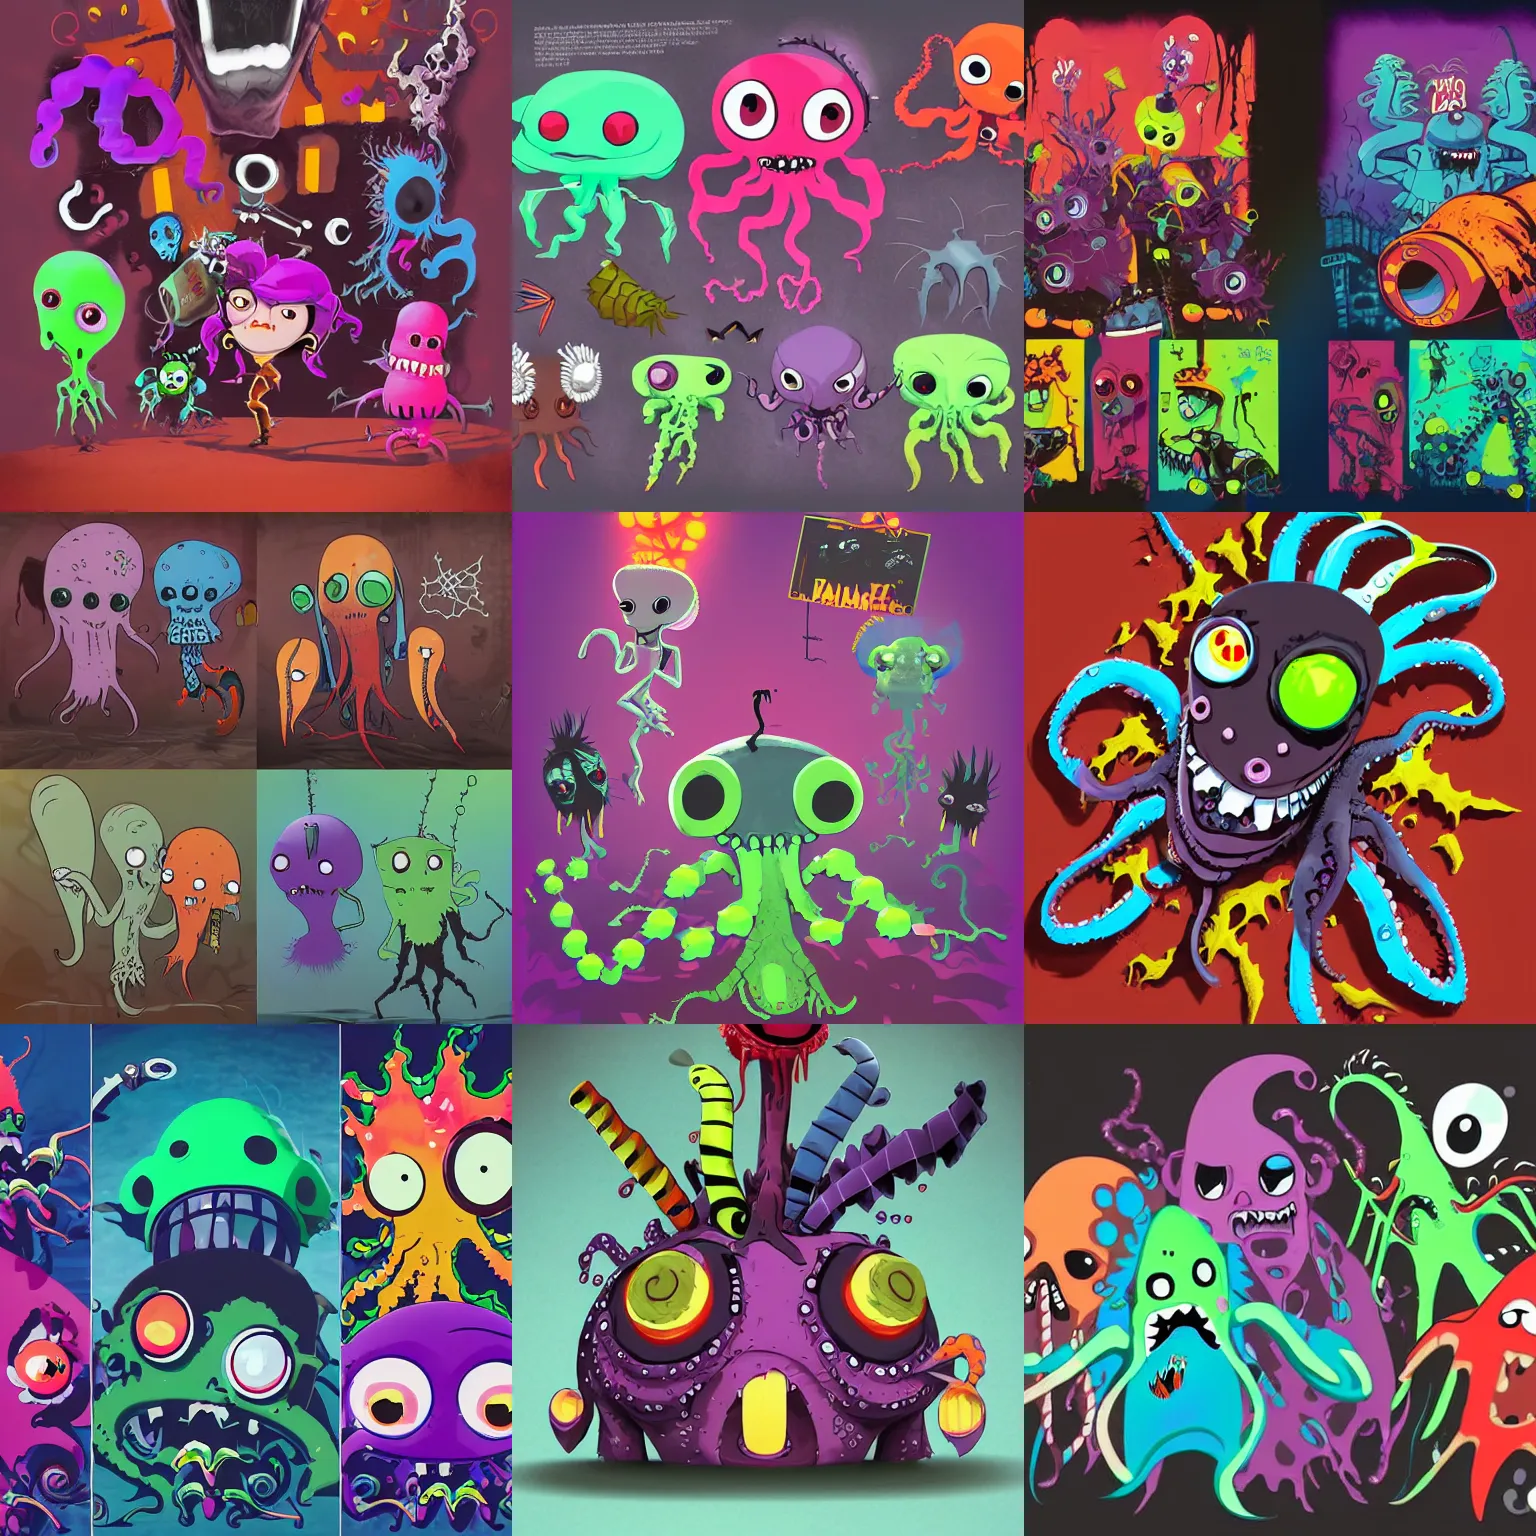 Prompt: punk rock spray paint vampiric electrifying halloween rockstar vampire octopus, angler fish, gulper eel, mantis shrimp, jellyfish and sea urchins conceptual character designs of various shapes and sizes by genndy tartakovsky and splatoon by nintendo and the psychonauts franchise by doublefine tim shafer artists for the new hotel transylvania film